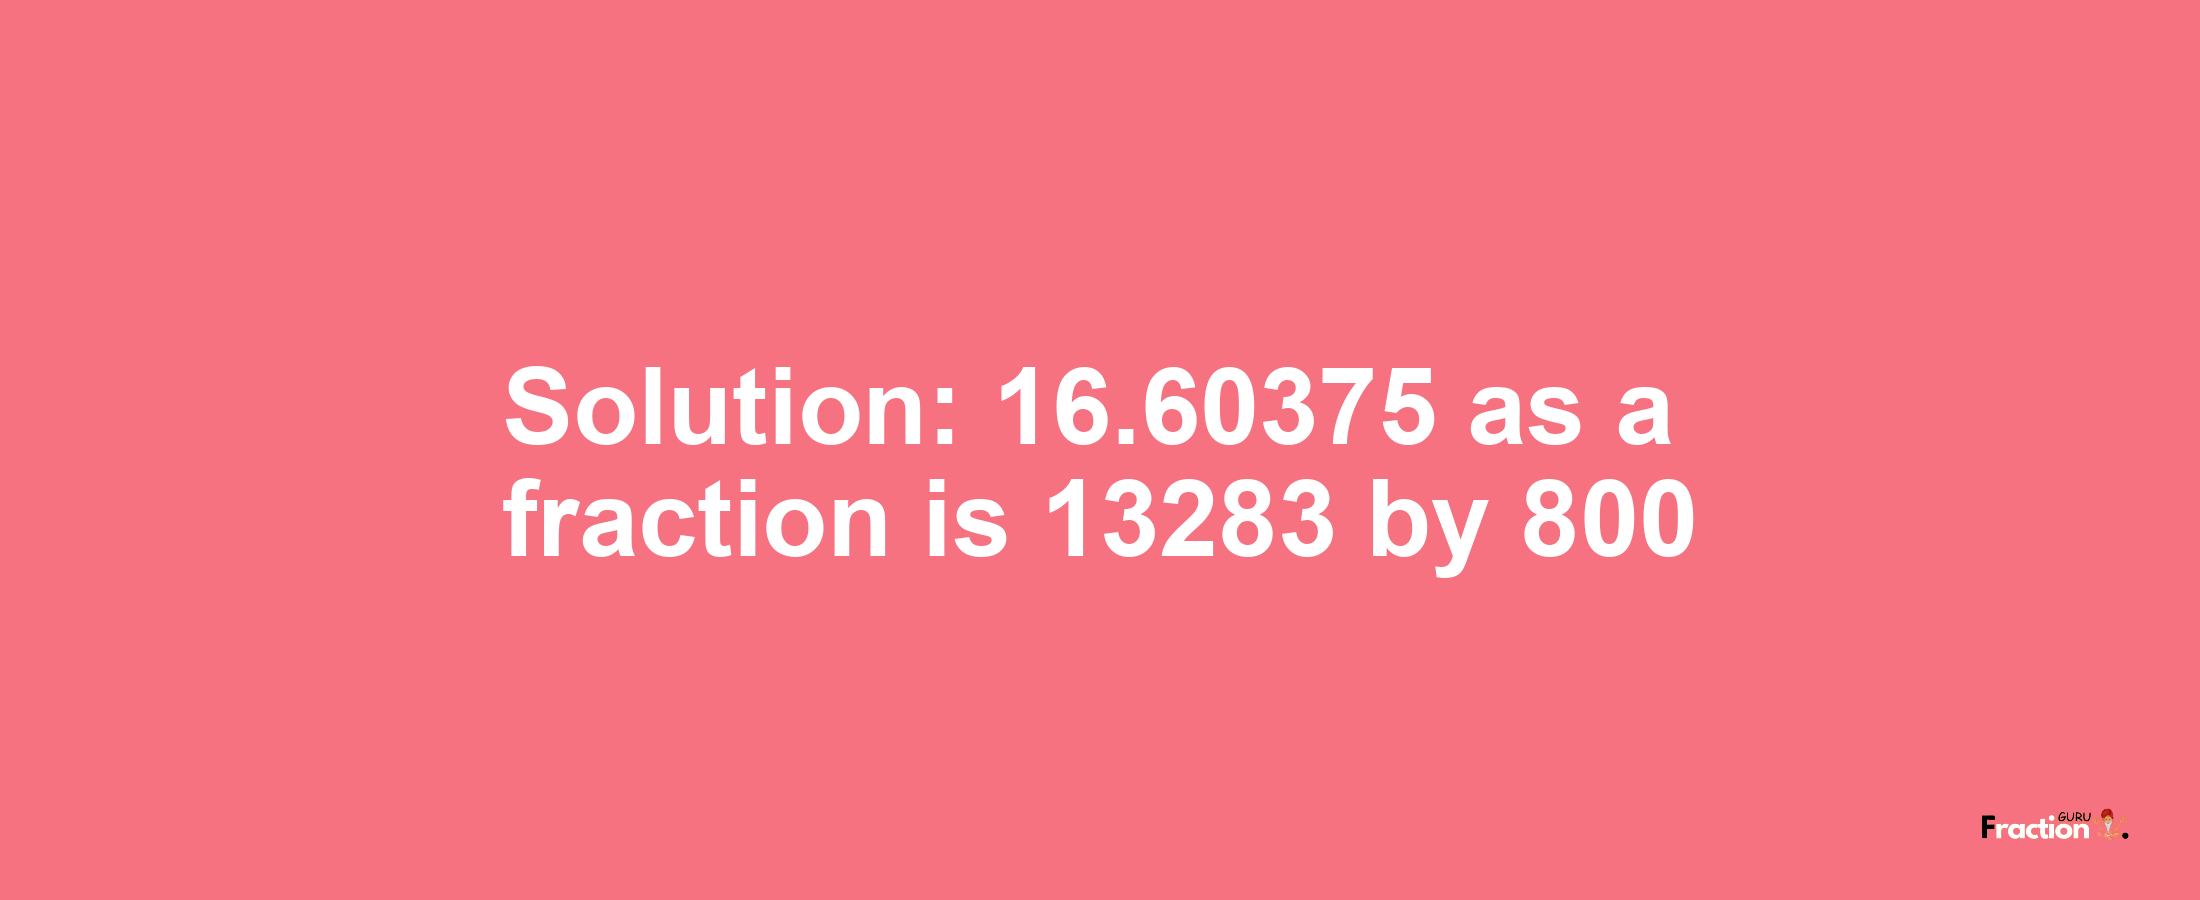 Solution:16.60375 as a fraction is 13283/800